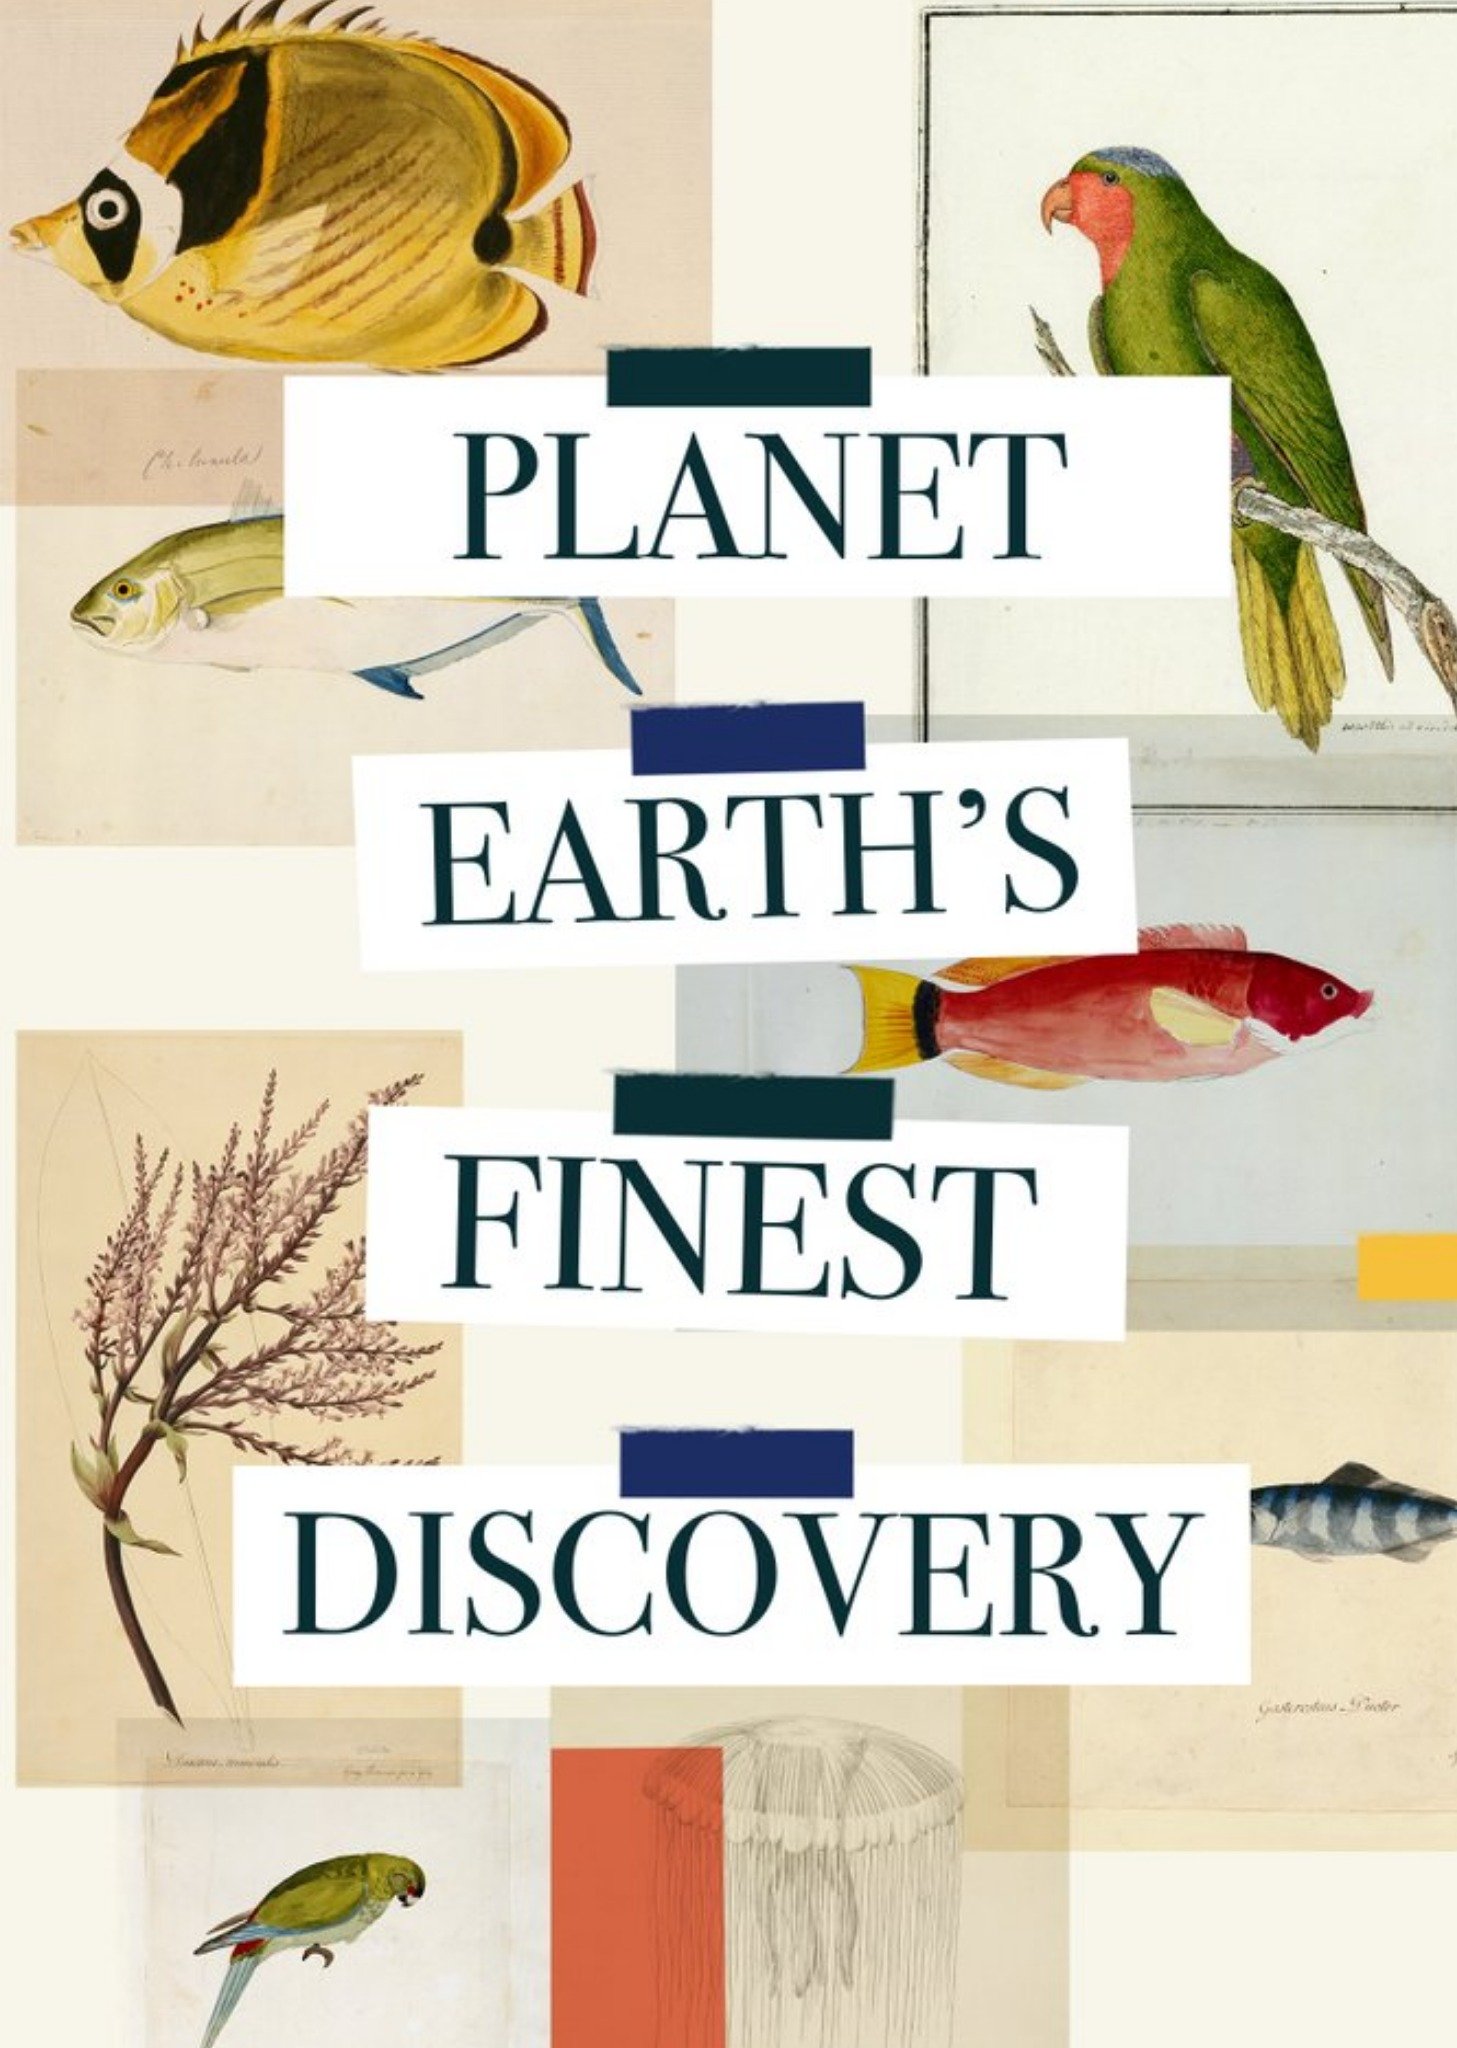 The Natural History Museum Natural History Museum Planet Earth's Finest Discovery Birthday Card, Lar